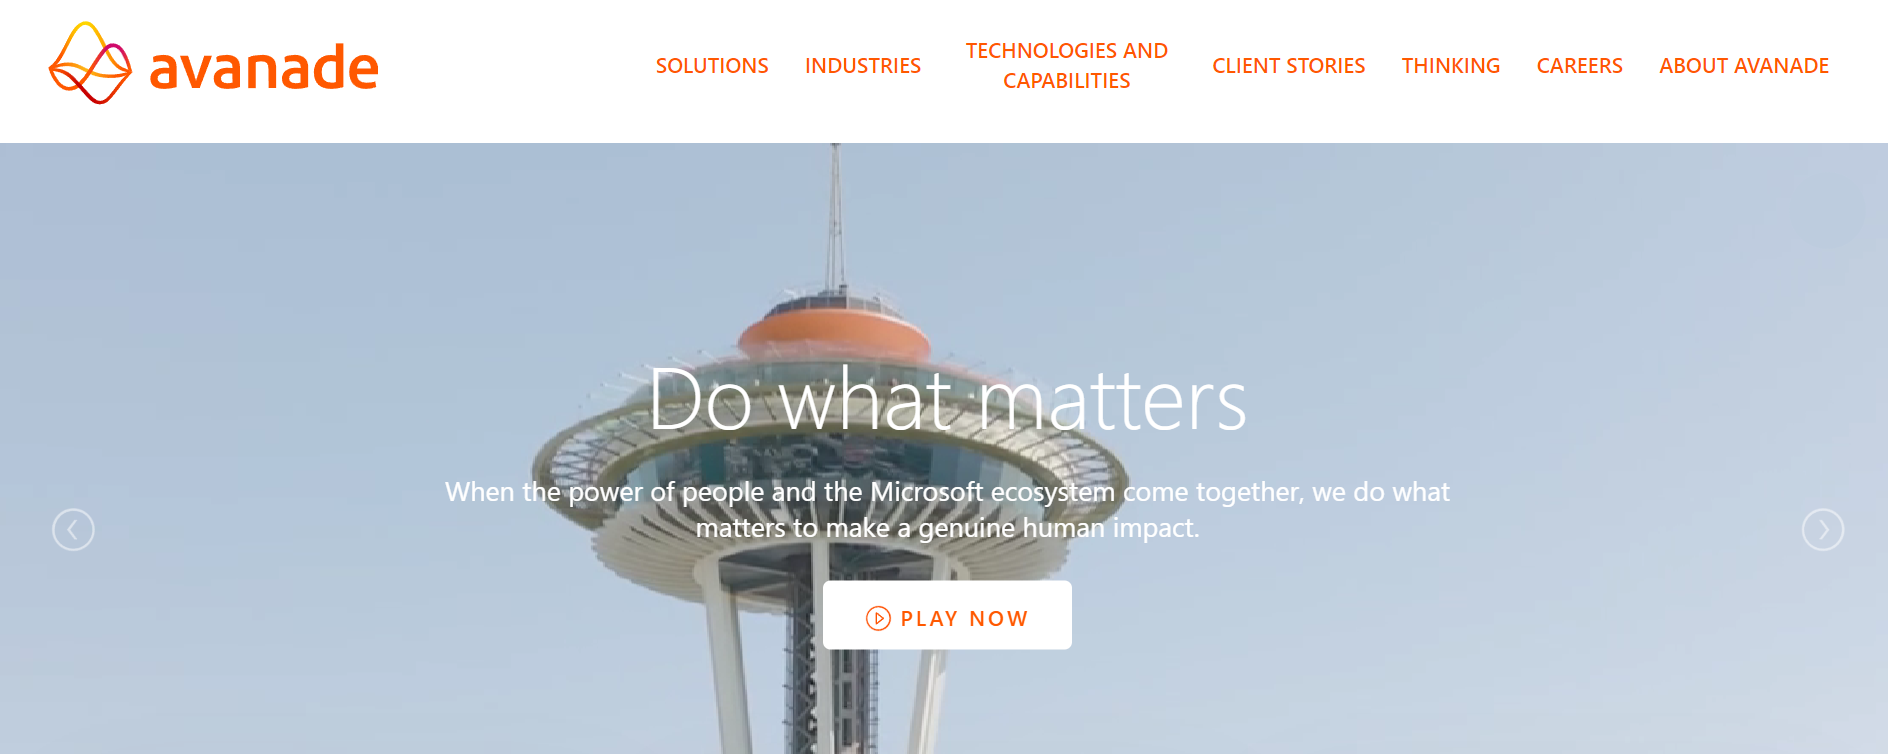 Avanade homepage: Do what matters